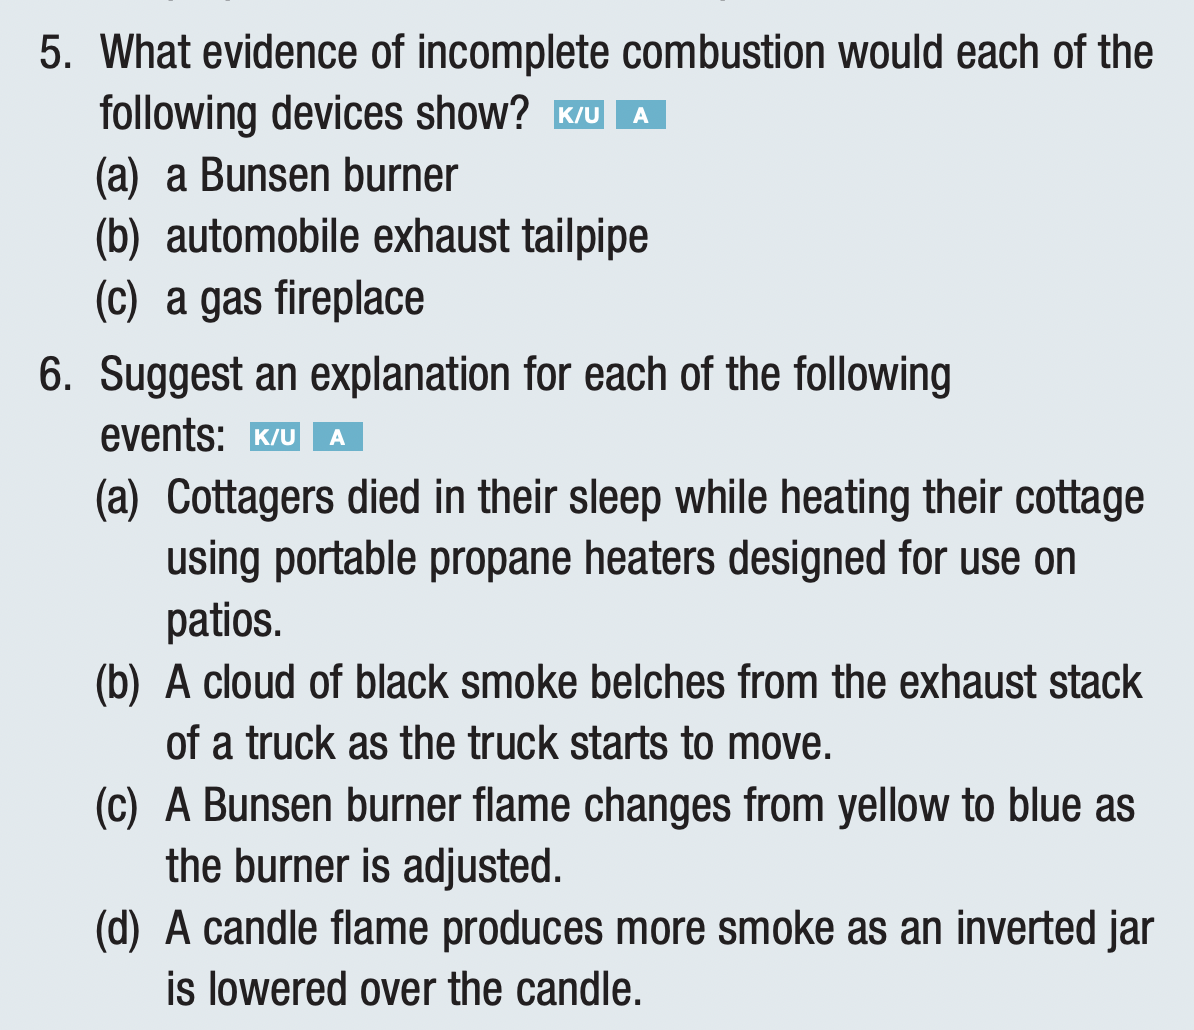 5. What evidence of incomplete combustion would each of the
following devices show? K/UA
(a) a Bunsen burner
(b) automobile exhaust tailpipe
(c) a gas fireplace
6. Suggest an explanation for each of the following
events: K/UA
(a) Cottagers died in their sleep while heating their cottage
using portable propane heaters designed for use on
patios.
(b) A cloud of black smoke belches from the exhaust stack
of a truck as the truck starts to move.
(c) A Bunsen burner flame changes from yellow to blue as
the burner is adjusted.
(d) A candle flame produces more smoke as an inverted jar
is lowered over the candle.